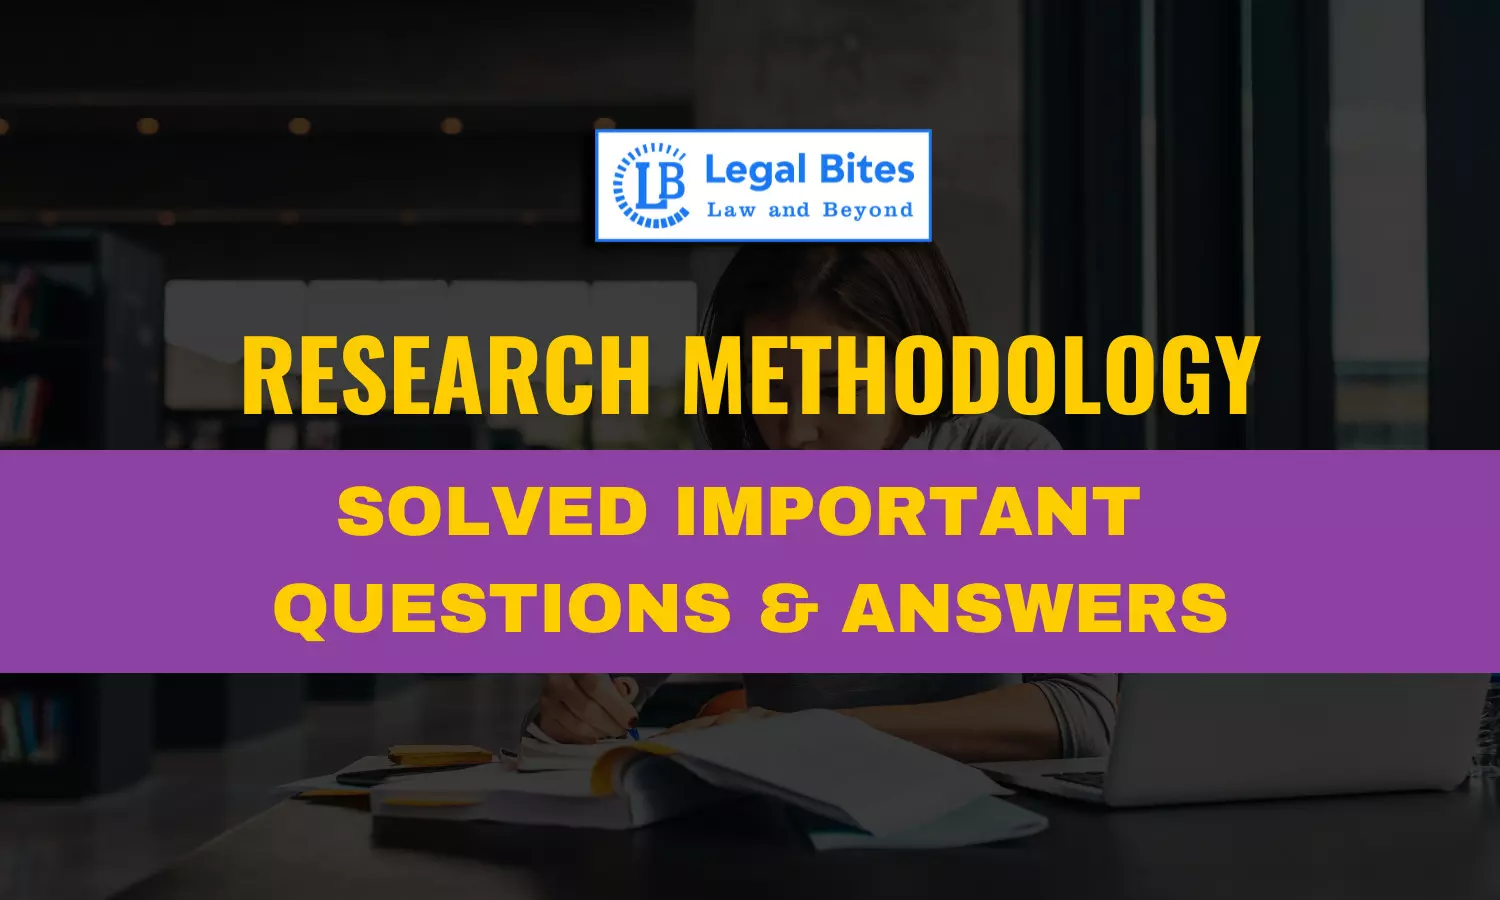 Distinguish between a Questionnaire and a Schedule. Design a questionnaire keeping in view any research objective you want to formulate. State which questions fulfil which research objectives of your study.